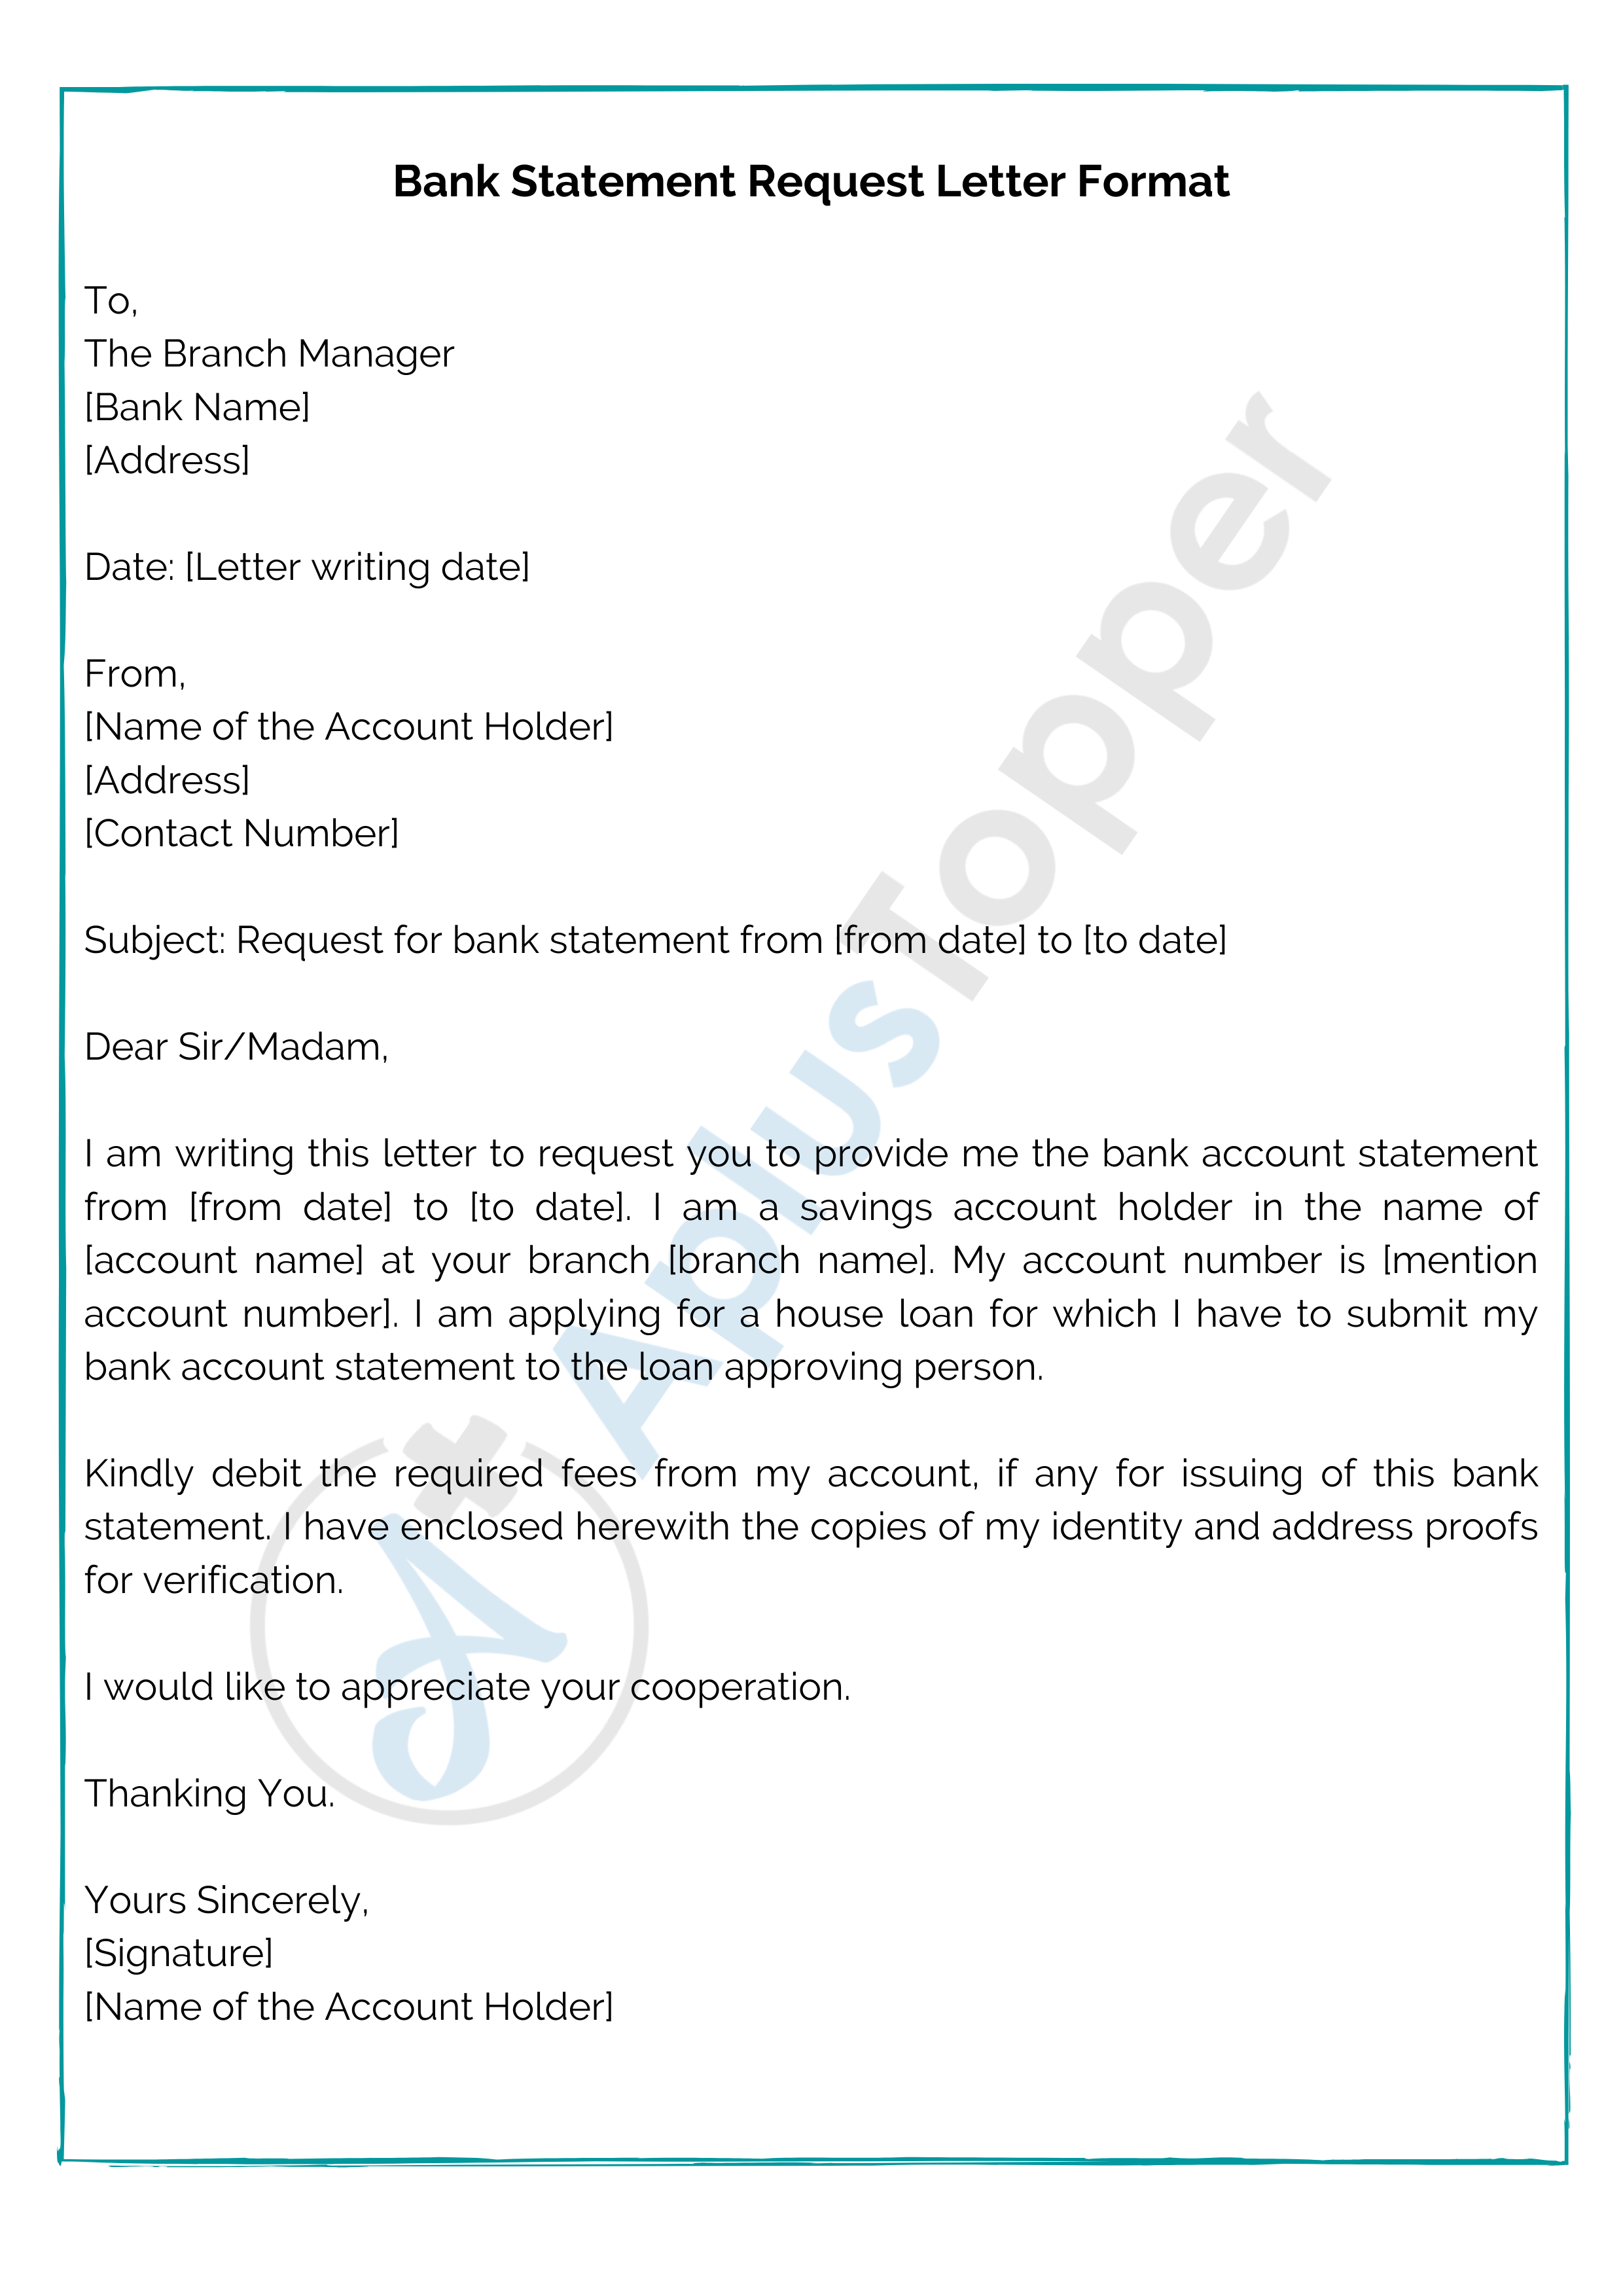 Bank Statement Request Letter  Format, Samples and How To Write A